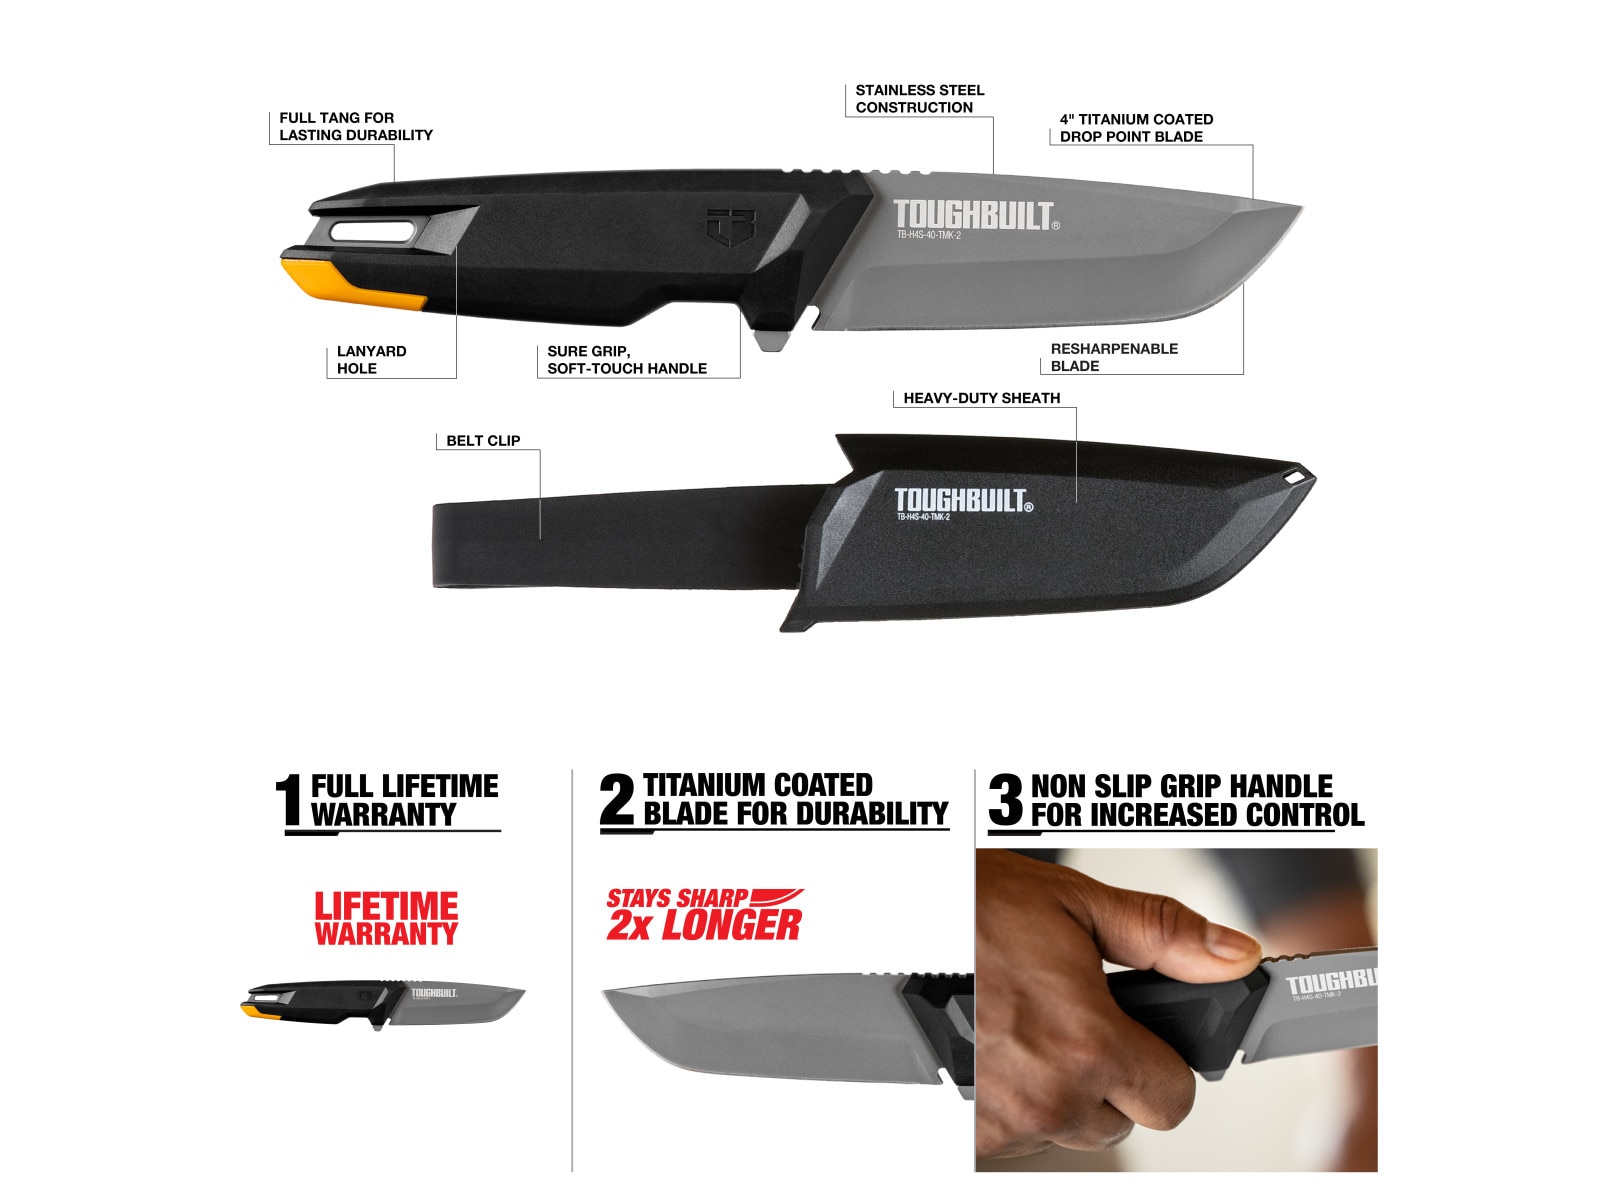 H\D Utility Knife Blades - Heavy Metal Trade Tools